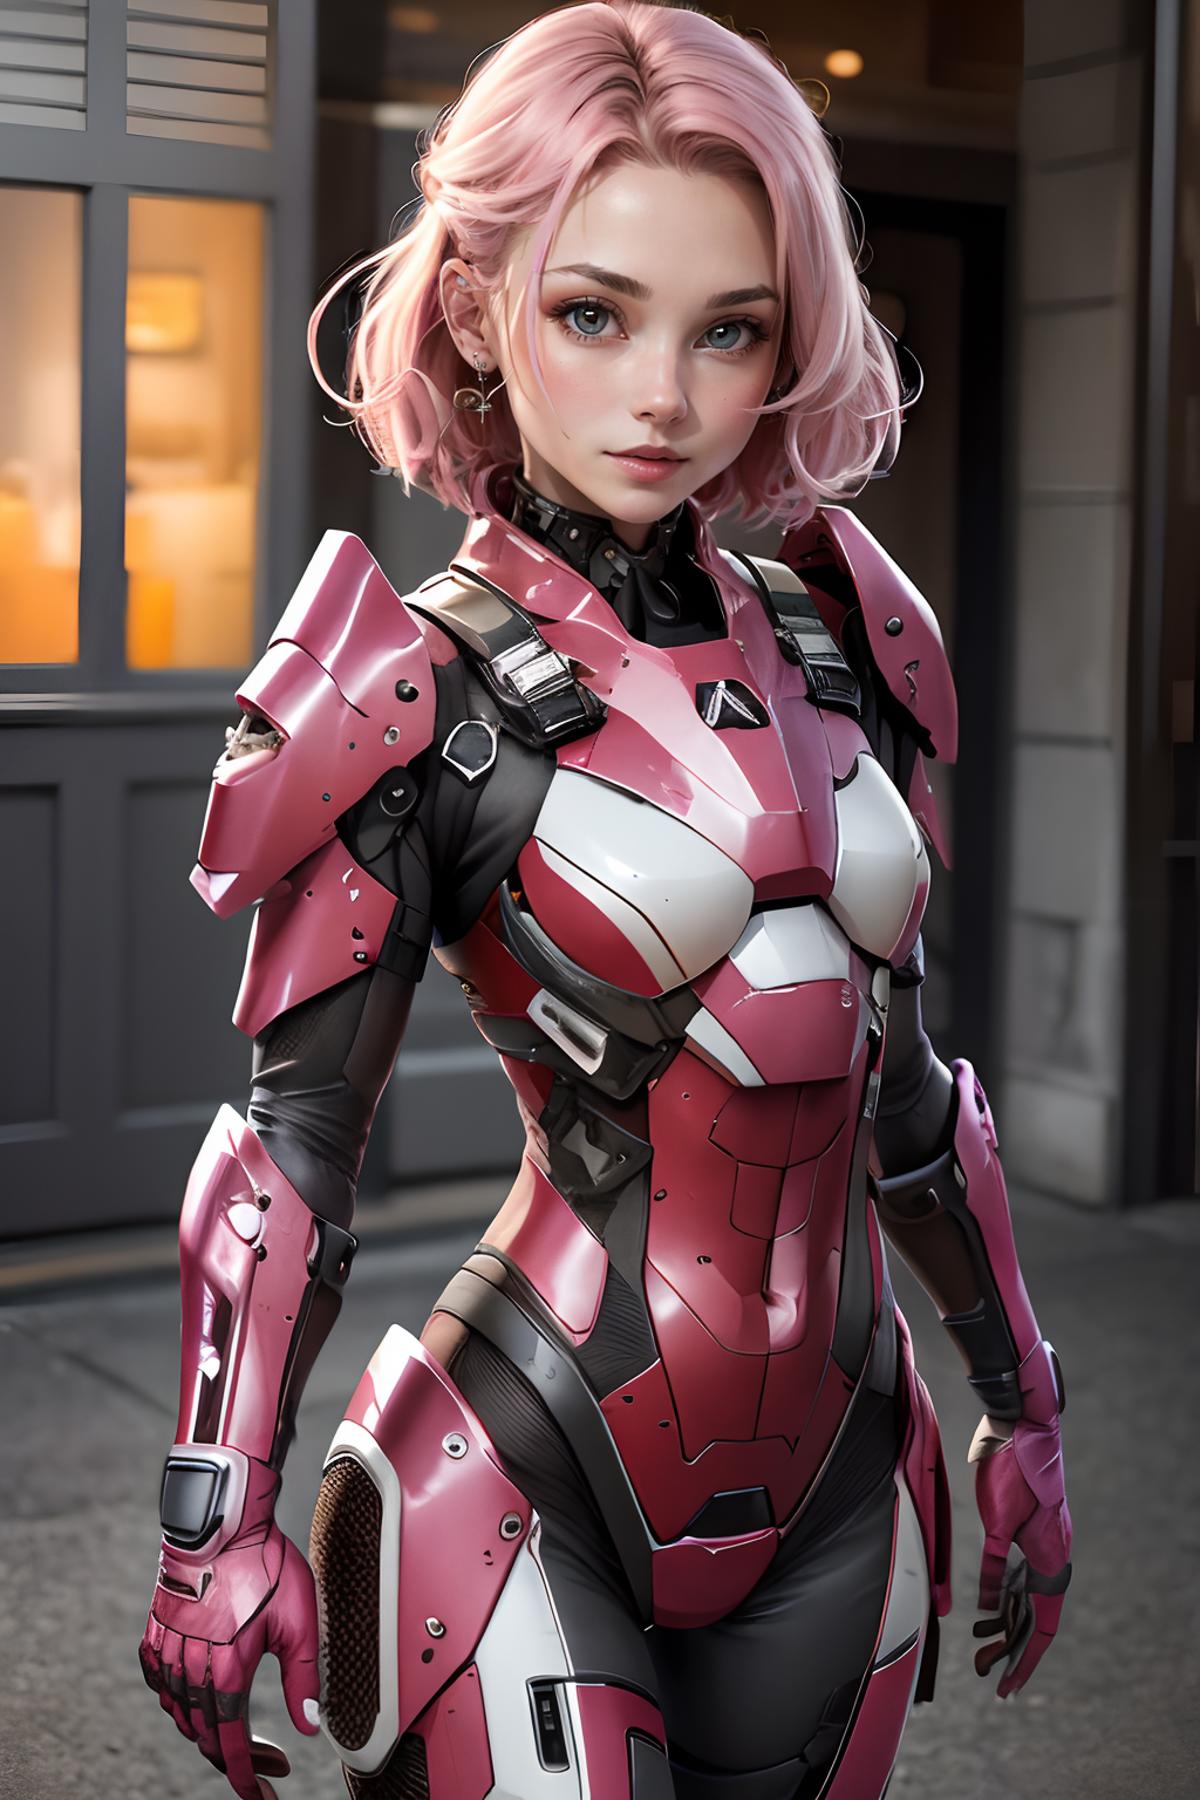 The image features a pink, white, and black female character wearing a futuristic armor suit. She is standing in front of a building, posing confidently with her arm extended. The character appears to be an animated or CGI figure, possibly from a video game or other digital media. The combination of the armor and the character's confident stance creates an intriguing and visually appealing scene.